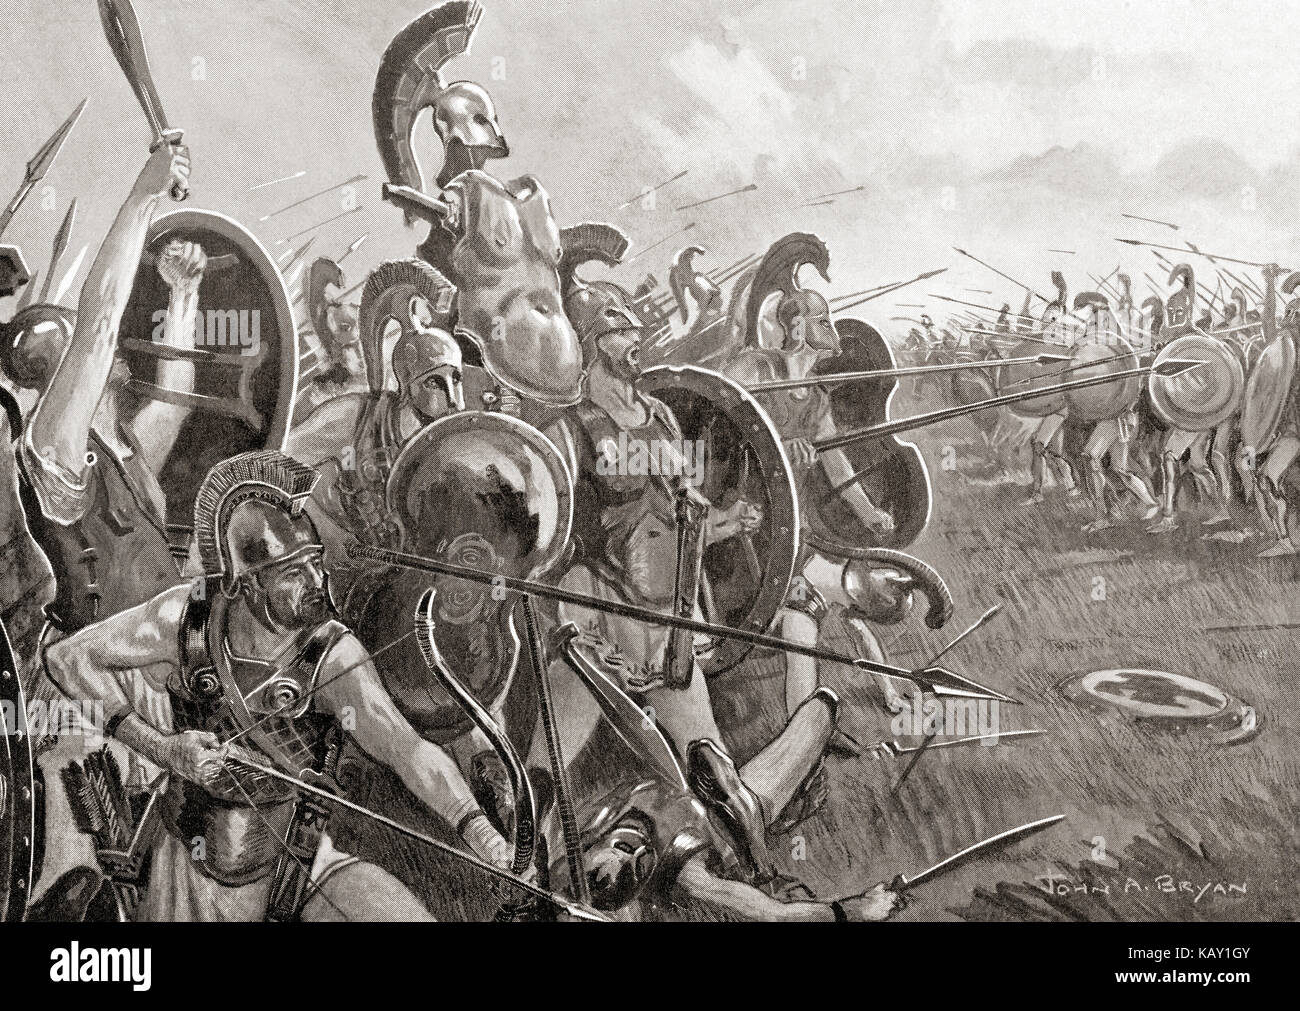 The Battle of Tanagra, 457 BC, between Athens and Sparta during the First Peloponnesian War.  From Hutchinson's History of the Nations, published 1915. Stock Photo